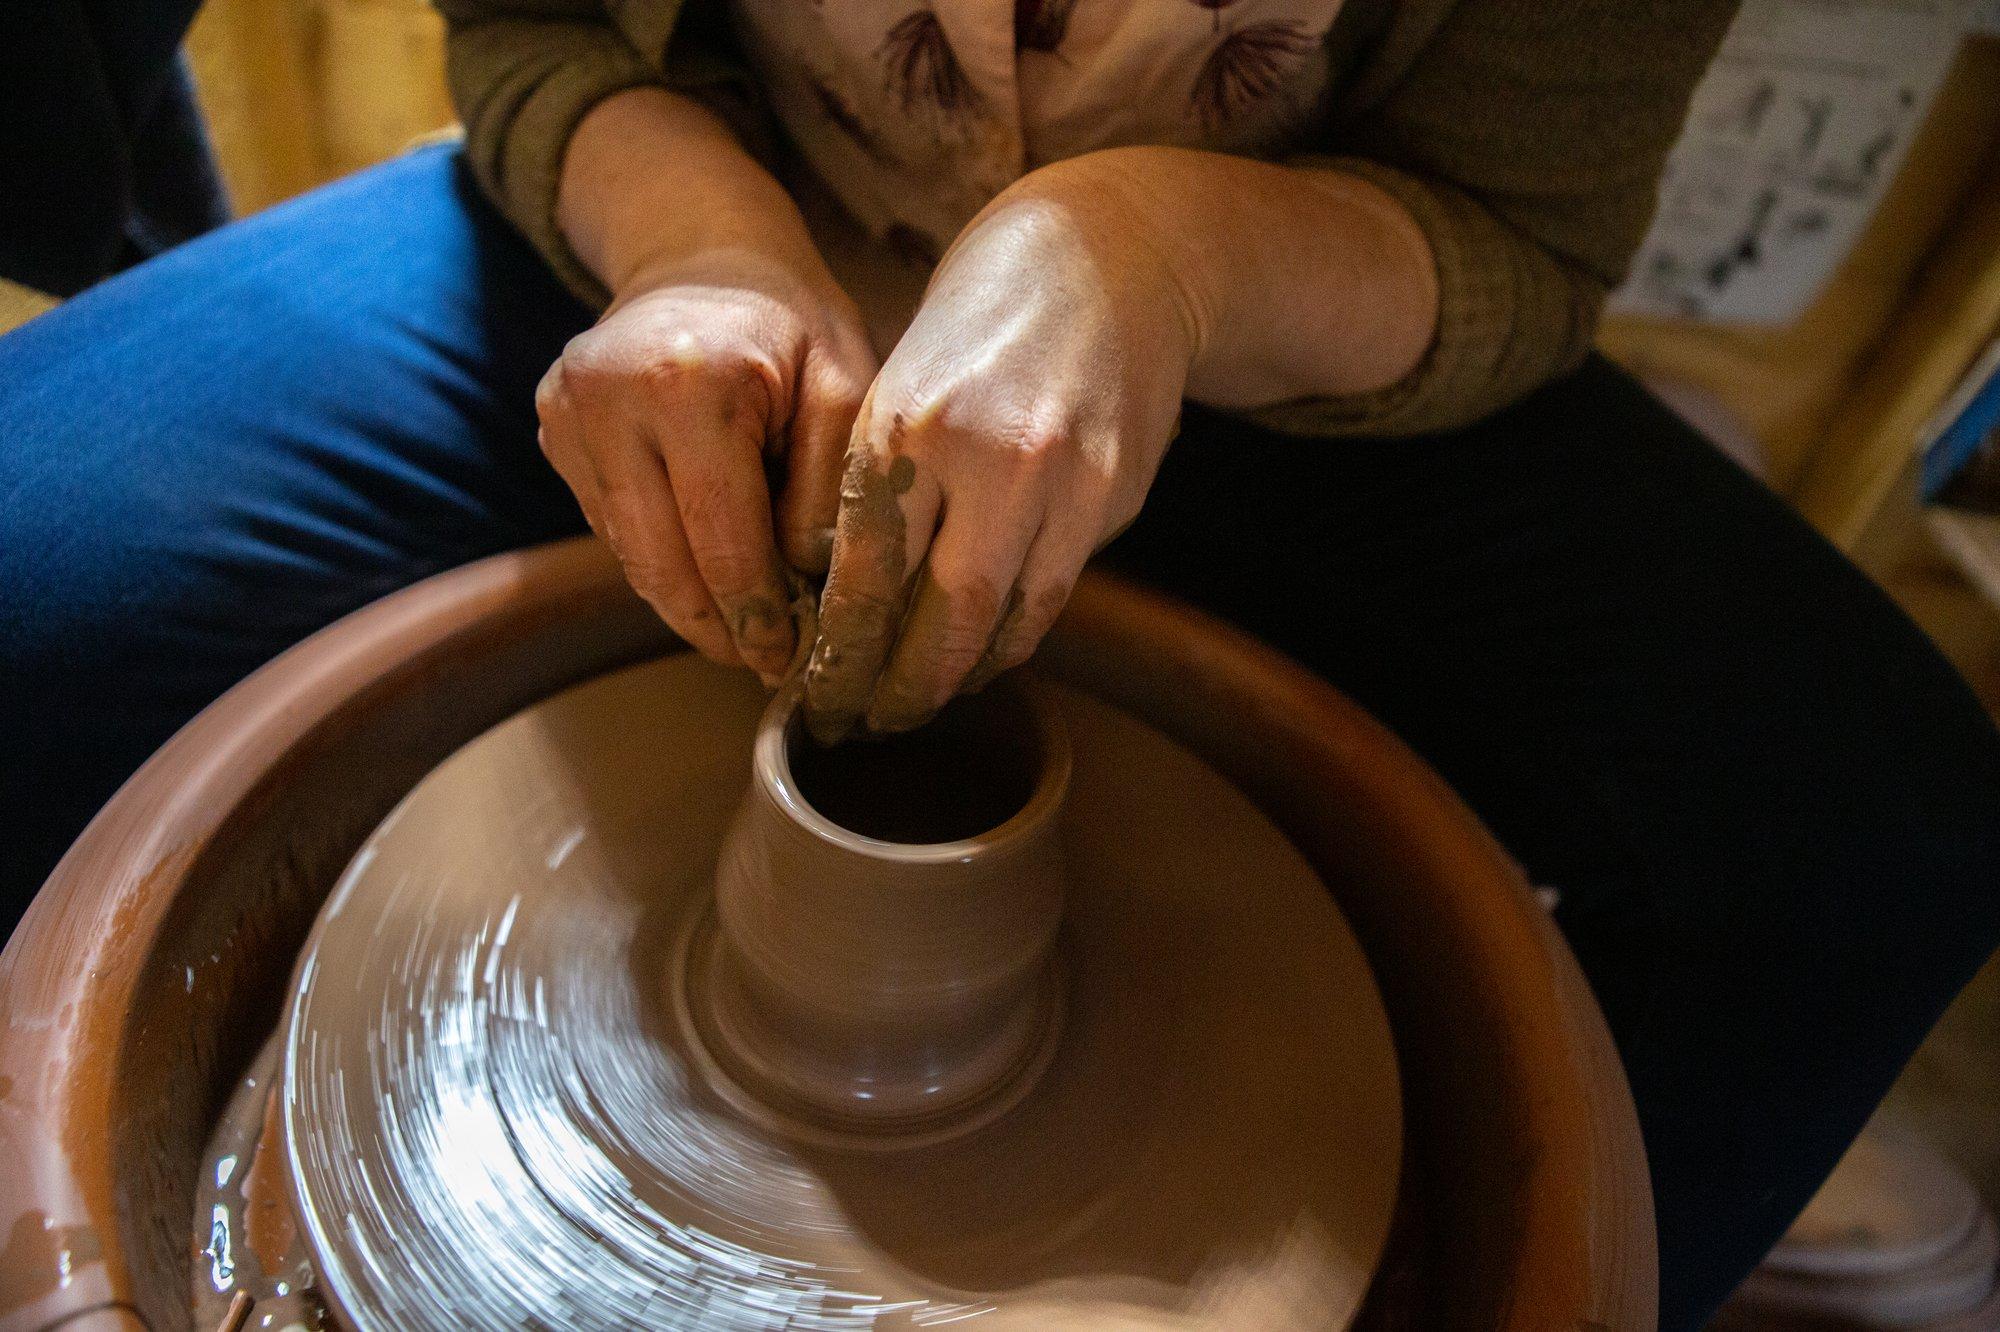 Ross is a potter in Florenceville-Bristol, New Brunswick, about a 90-minute drive northwest of Fredericton, and also works in her own home pottery studio